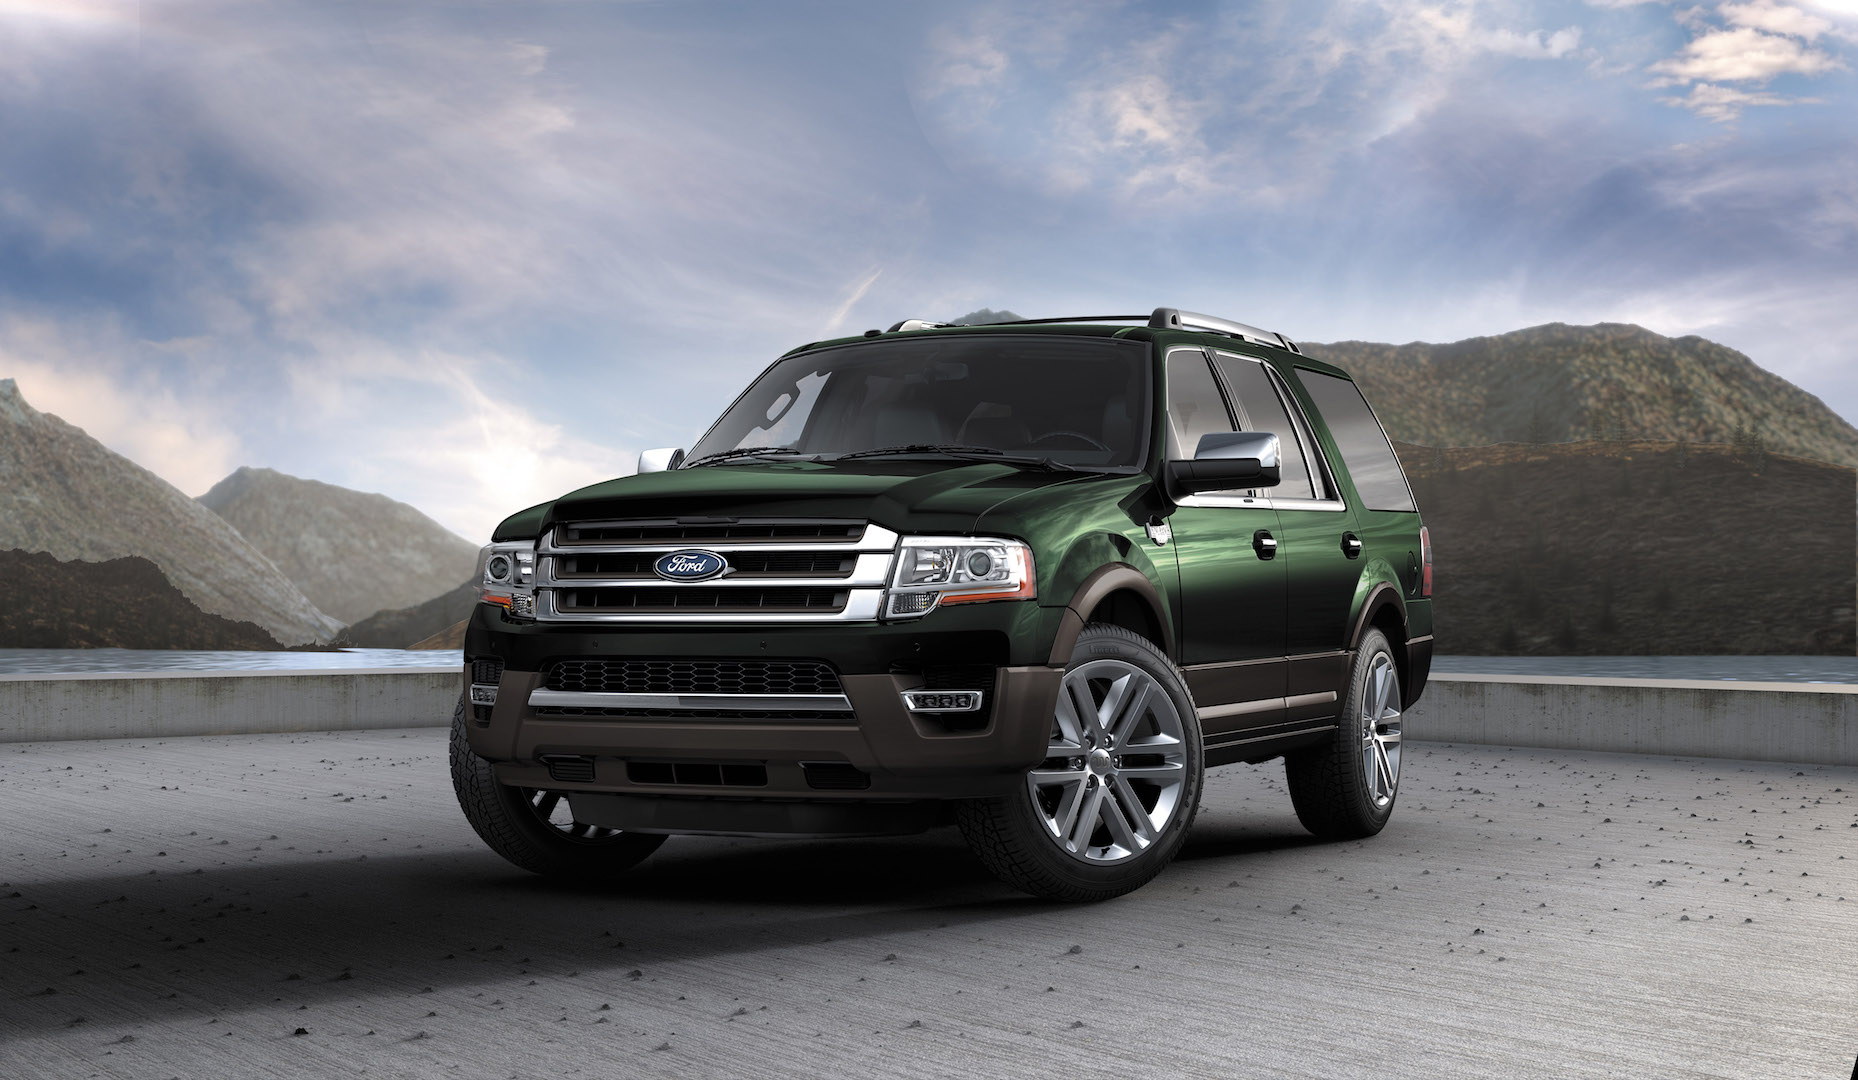 2016 Ford Expedition Review, Ratings, Specs, Prices, and Photos The